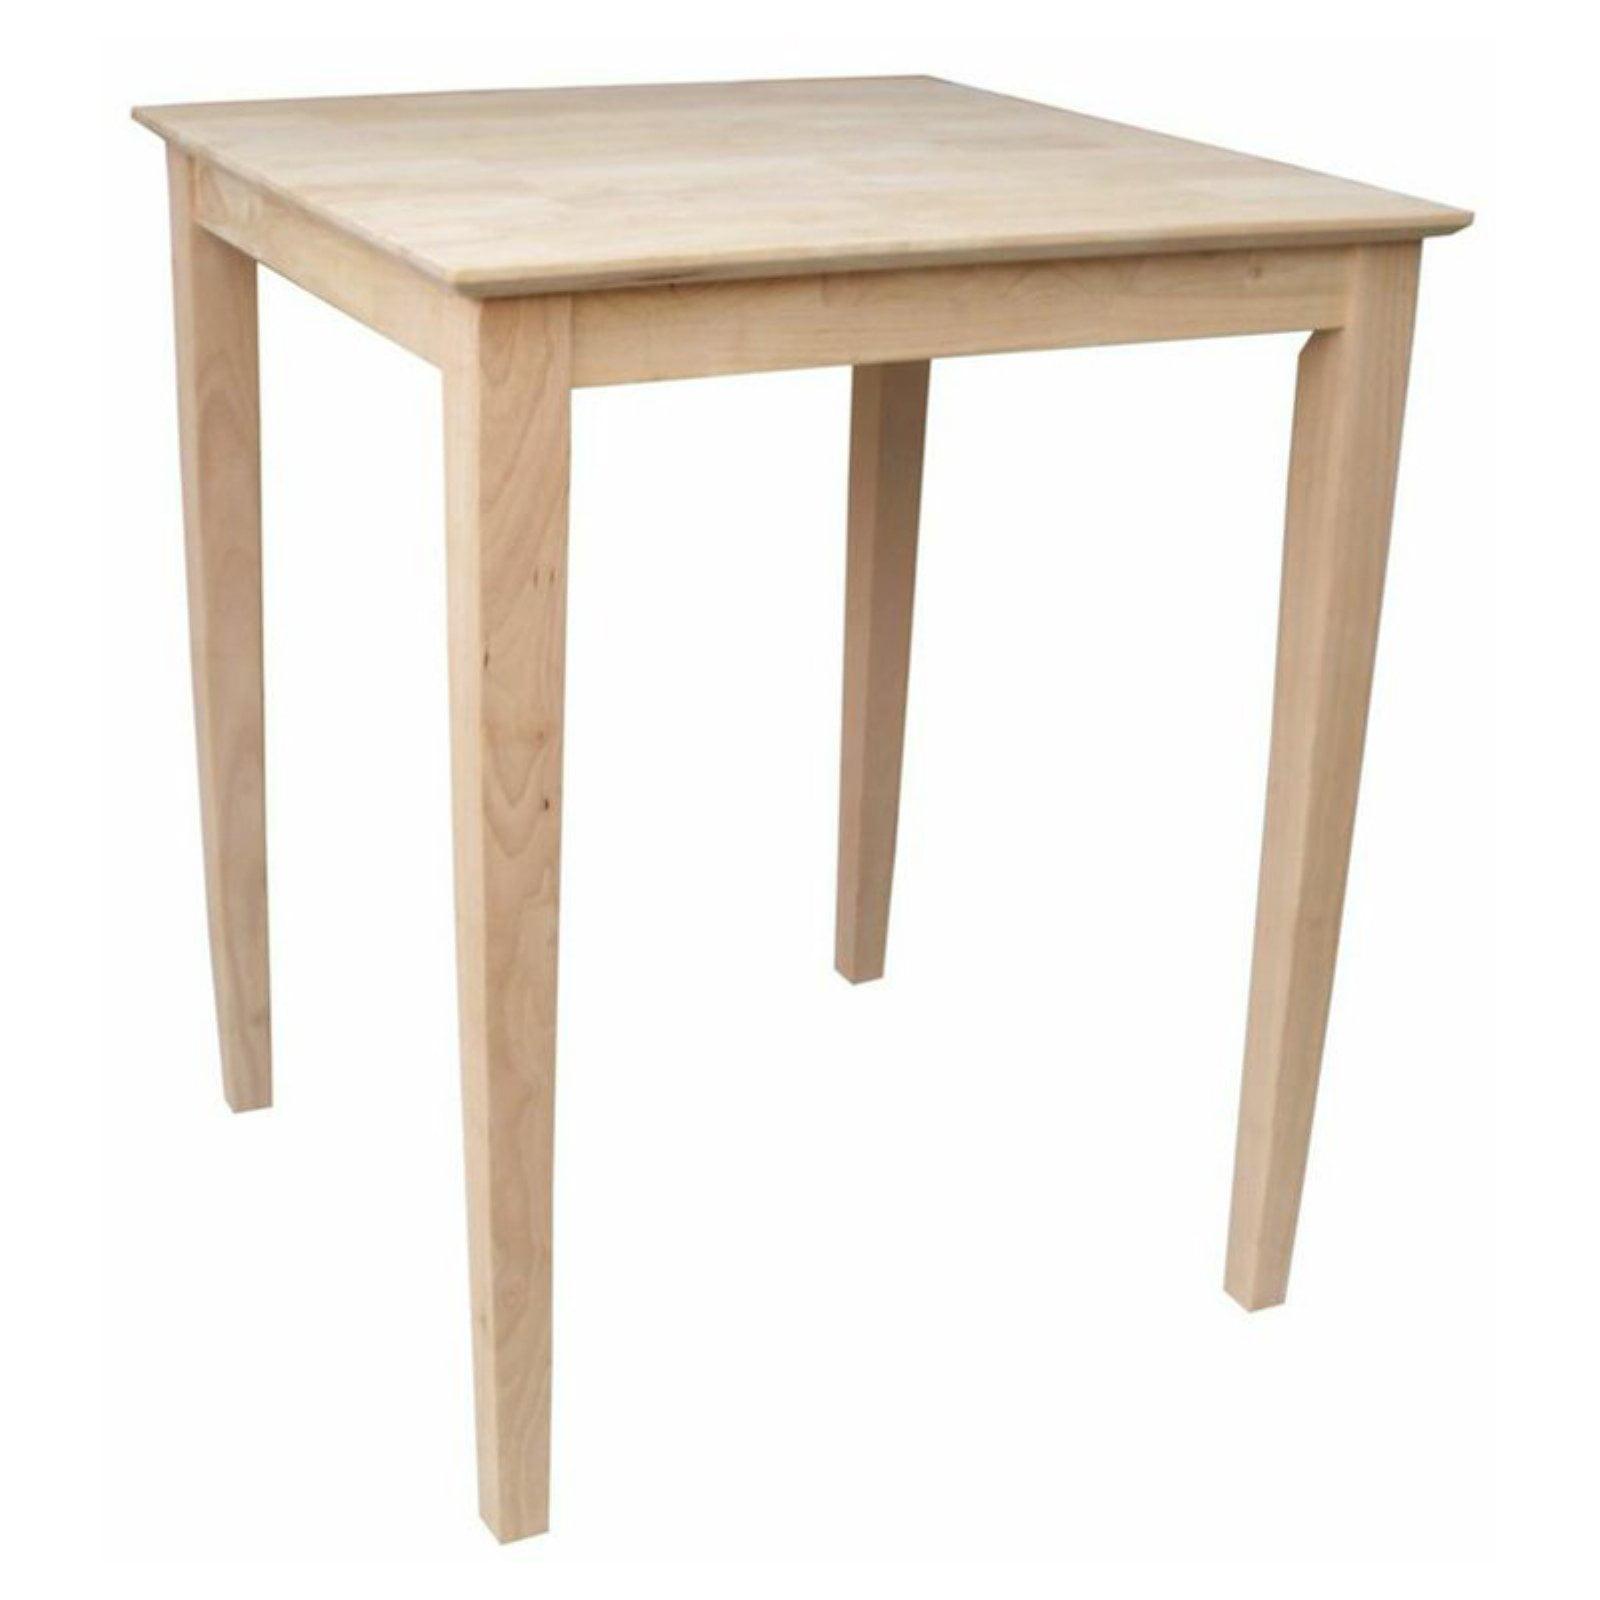 Elegant Shaker-Style 30" Square Solid Wood Bar Height Table